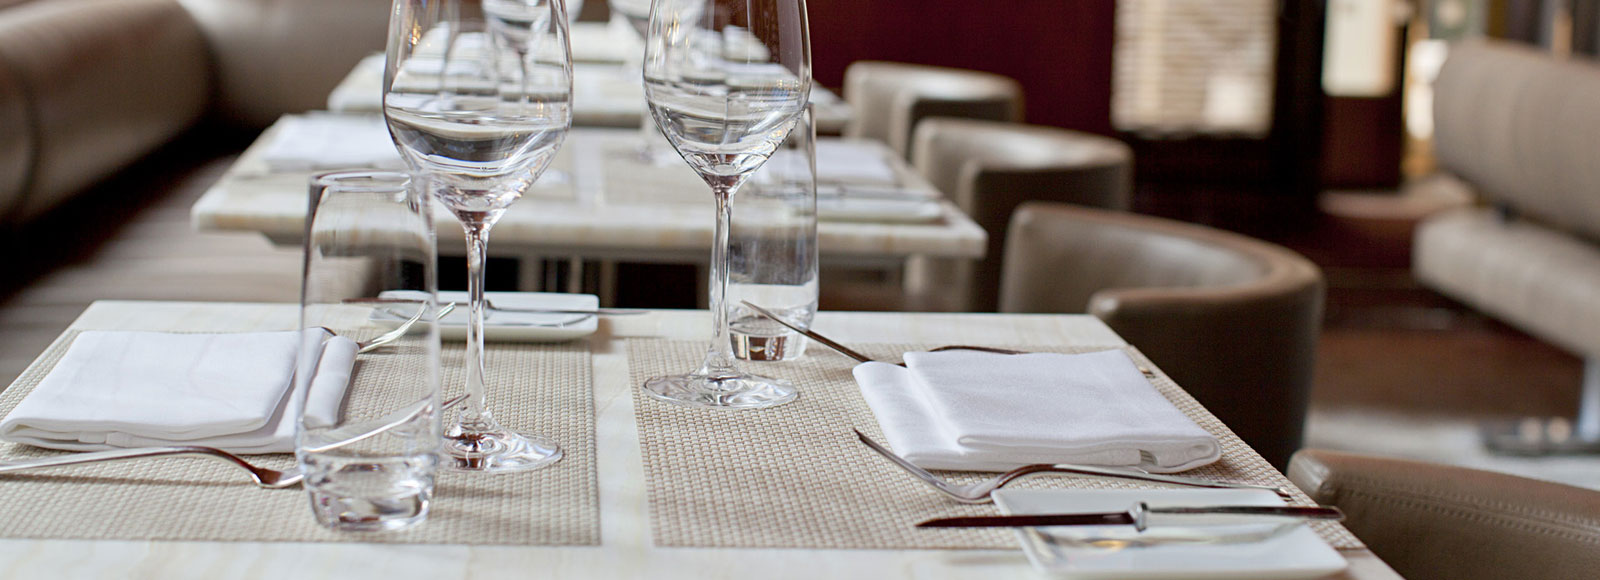 Bamboo placemats in chino and Basketweave placemats in khaki used at Le Bernardin in New York